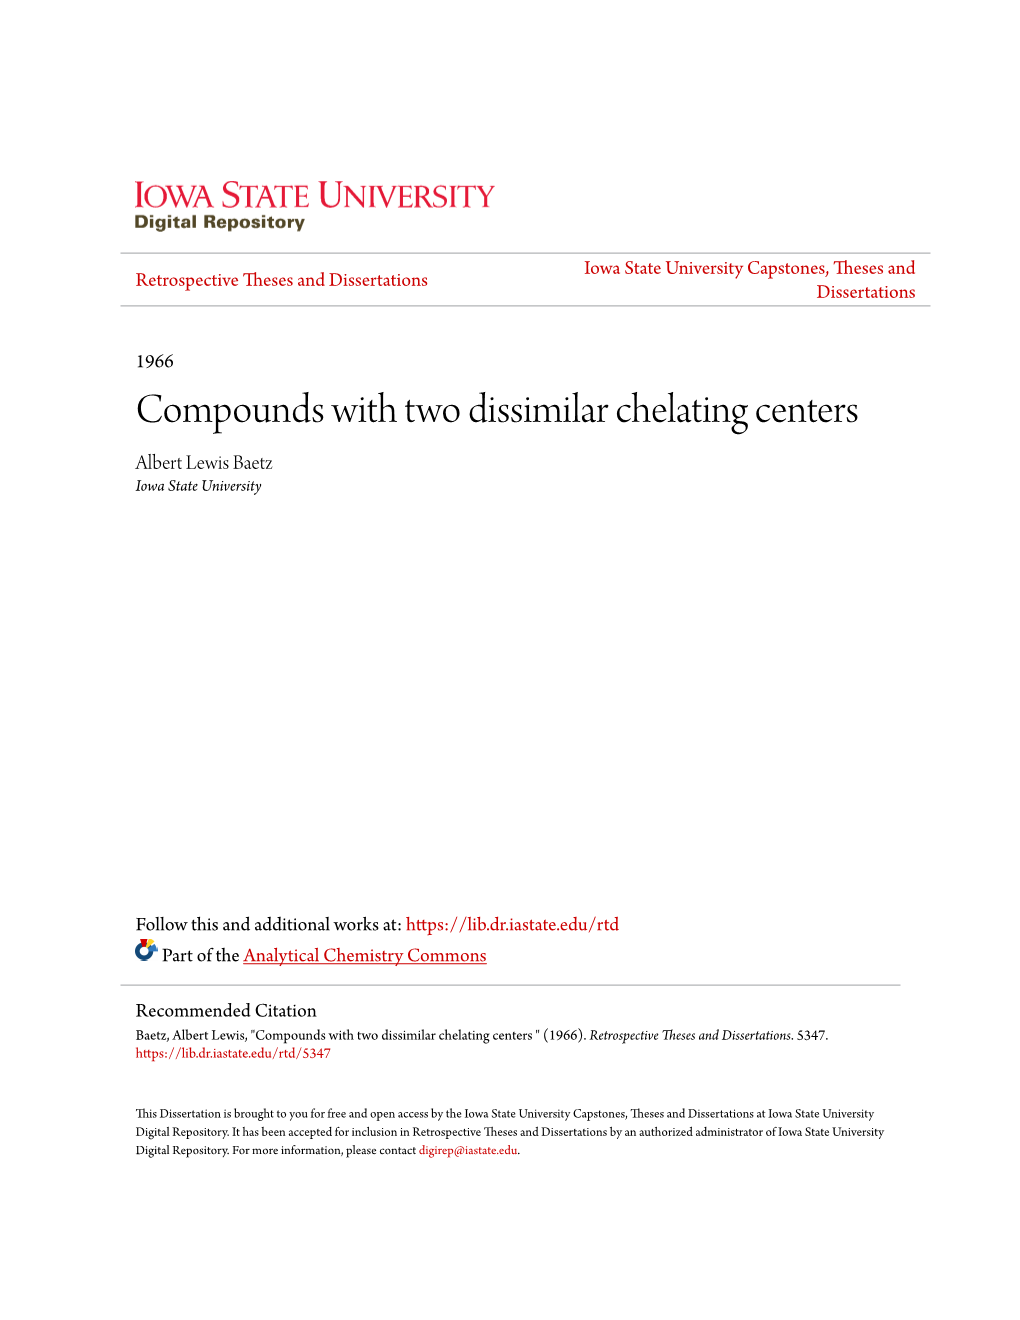 Compounds with Two Dissimilar Chelating Centers Albert Lewis Baetz Iowa State University